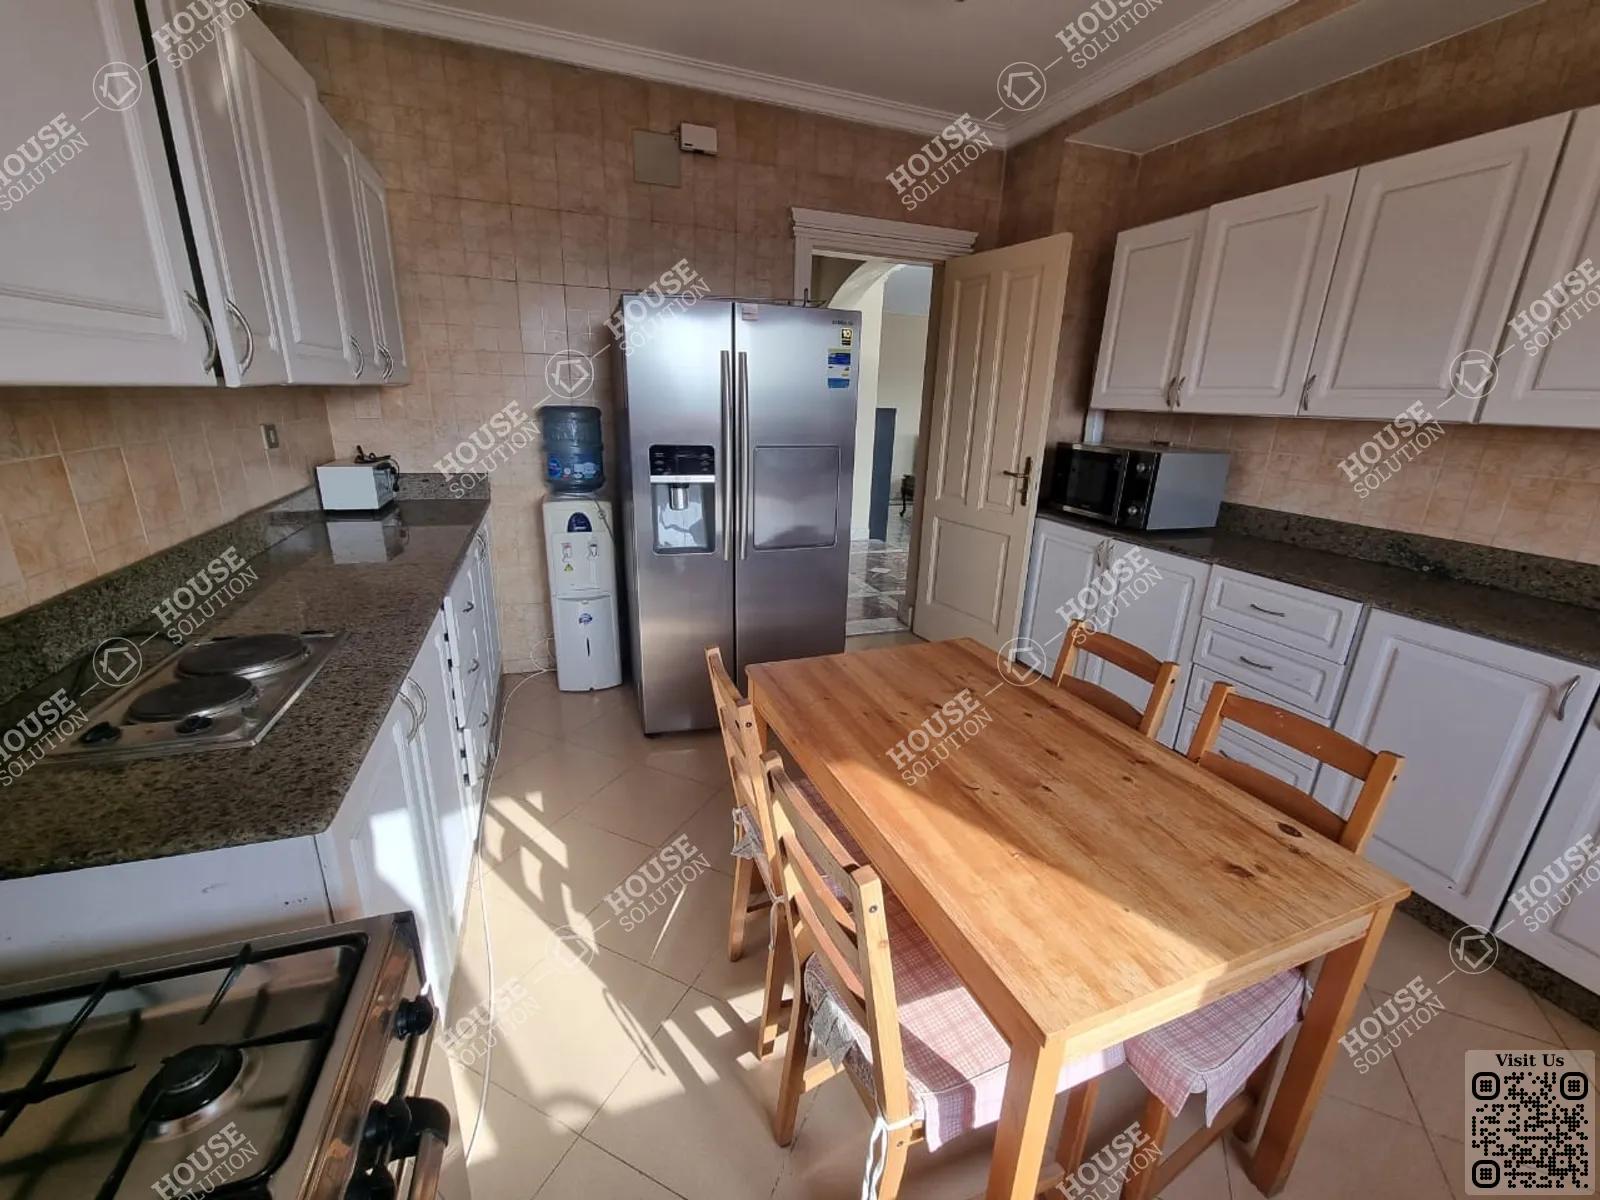 KITCHEN  @ Apartments For Rent In Maadi Maadi Degla Area: 300 m² consists of 4 Bedrooms 4 Bathrooms Modern furnished 5 stars #3955-1